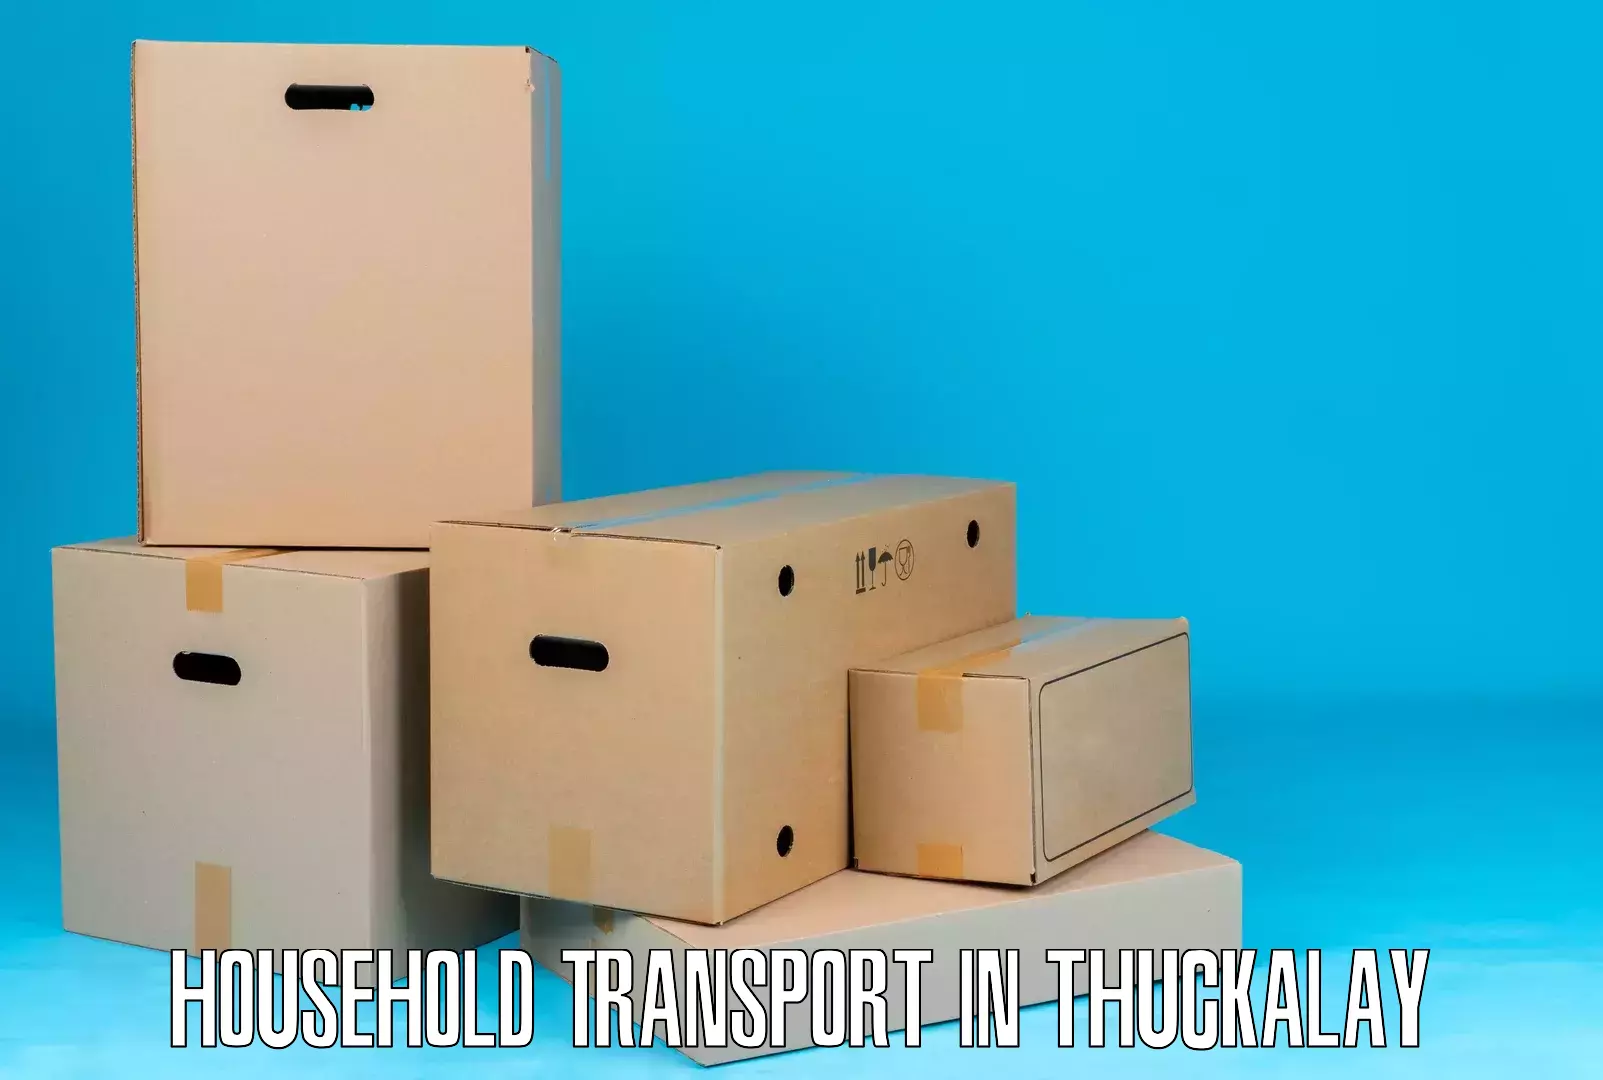 Home relocation experts in Thuckalay